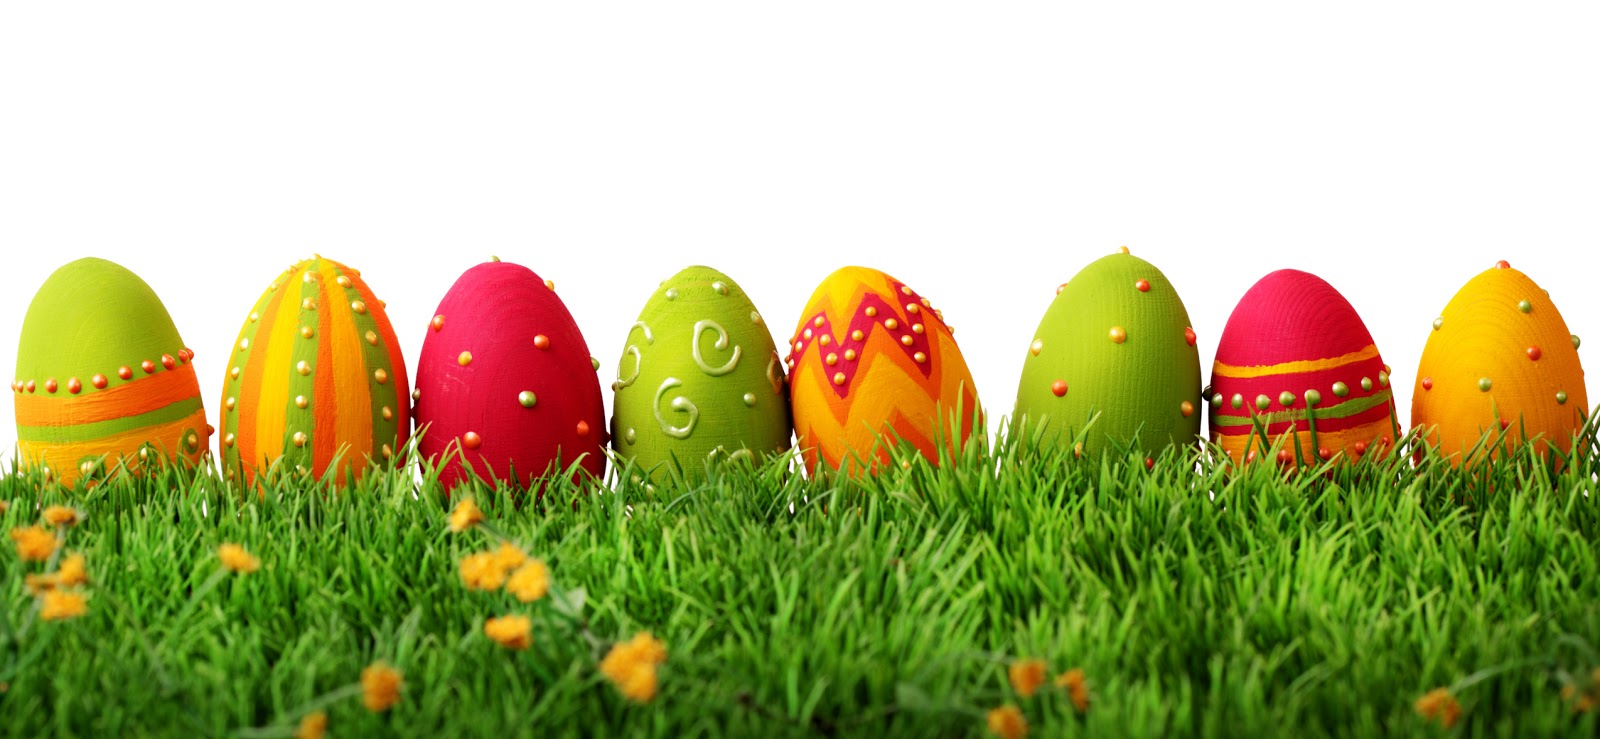 REMENGLISH: HAPPY EASTER!